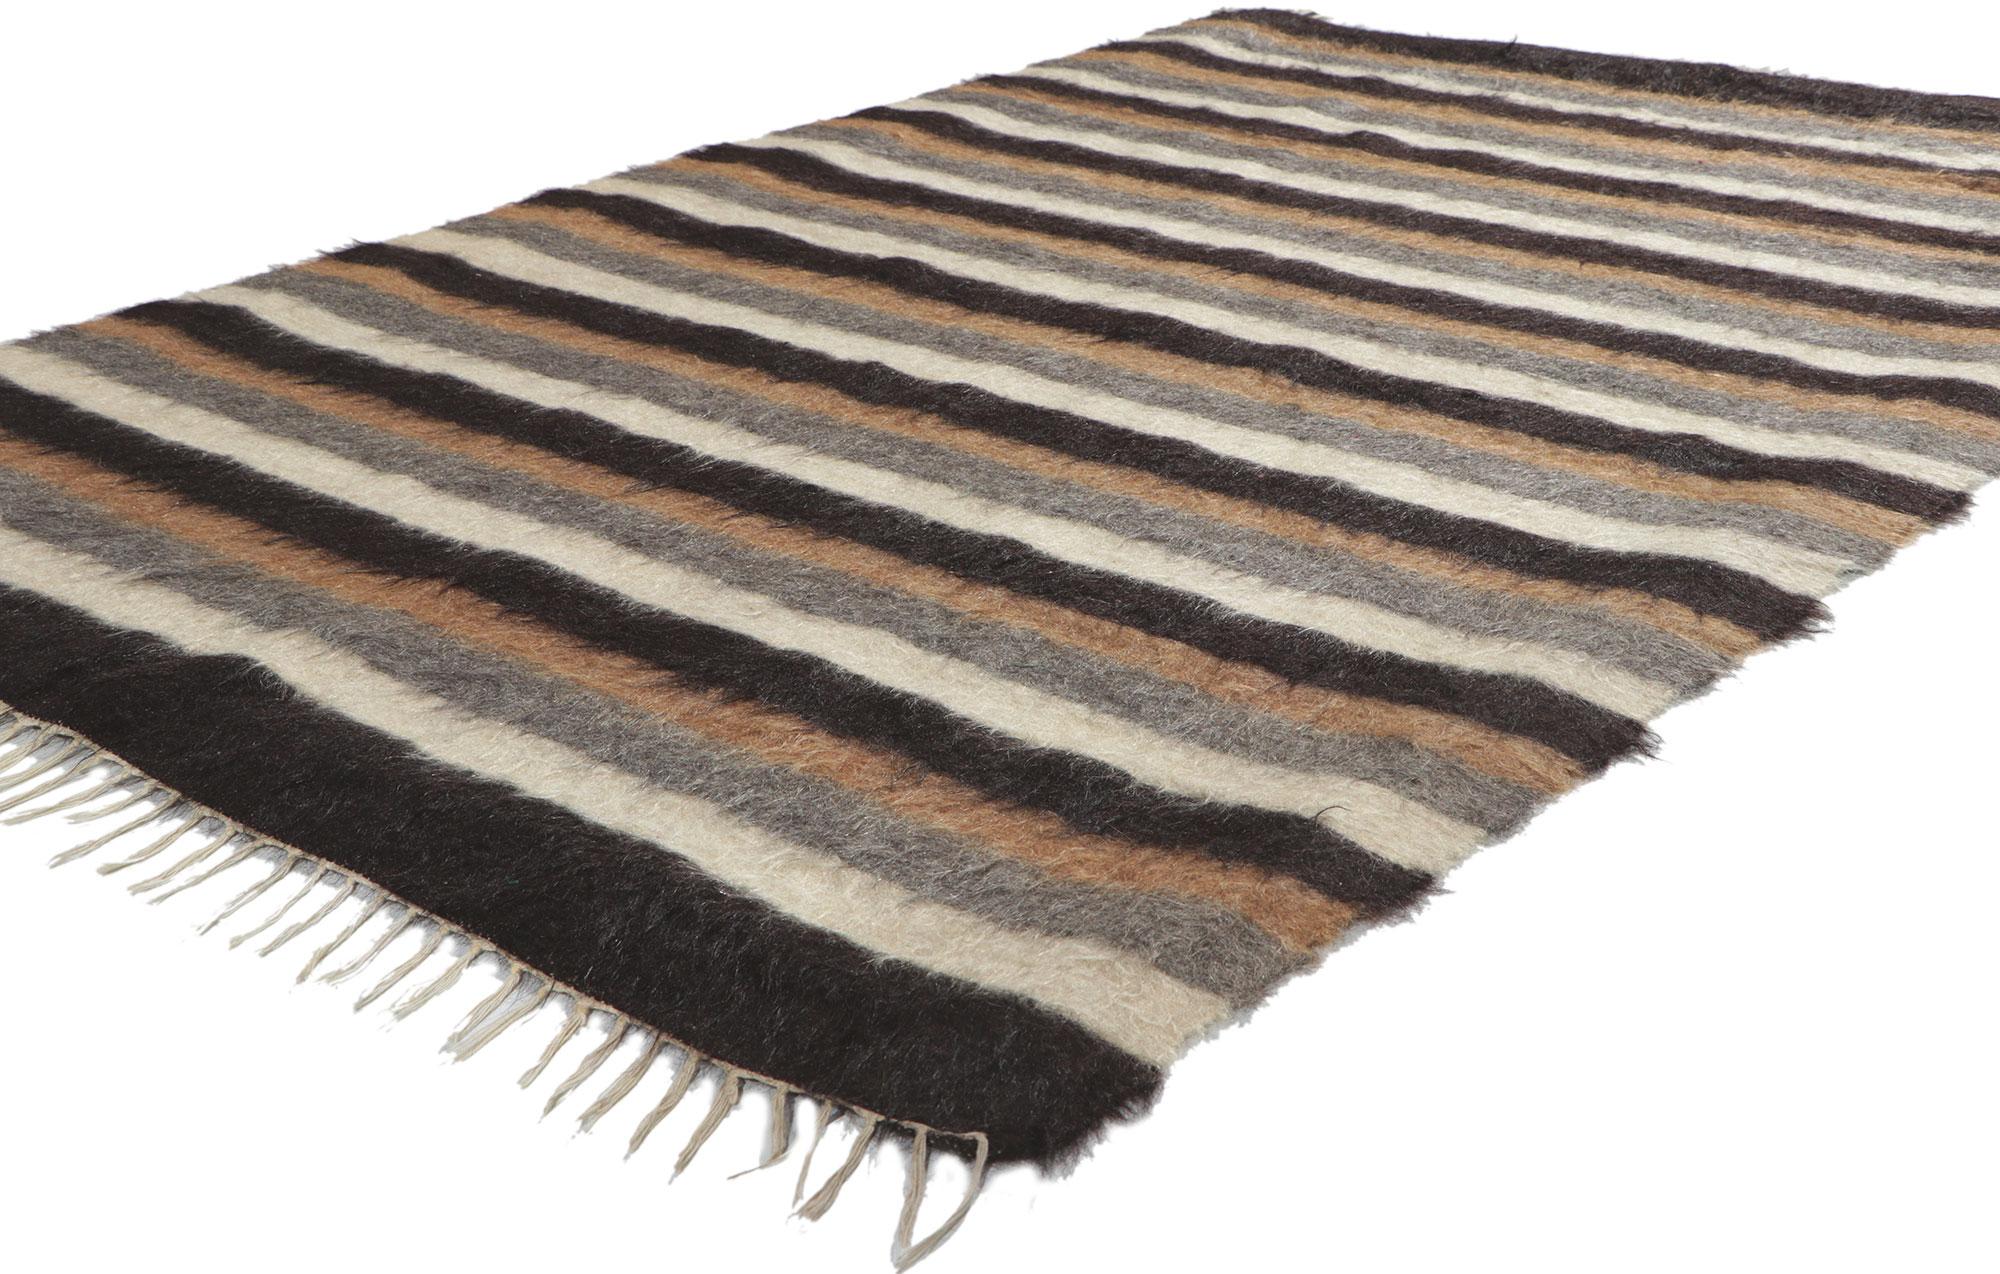 53835 vintage Turkish Angora wool Kilim rug, 04'01 x 06'00. With its shaggy pile, incredible detail and texture, this handwoven Turkish angora kilim rug is a captivating vision of woven beauty. The eye-catching striped pattern and earthy colorway